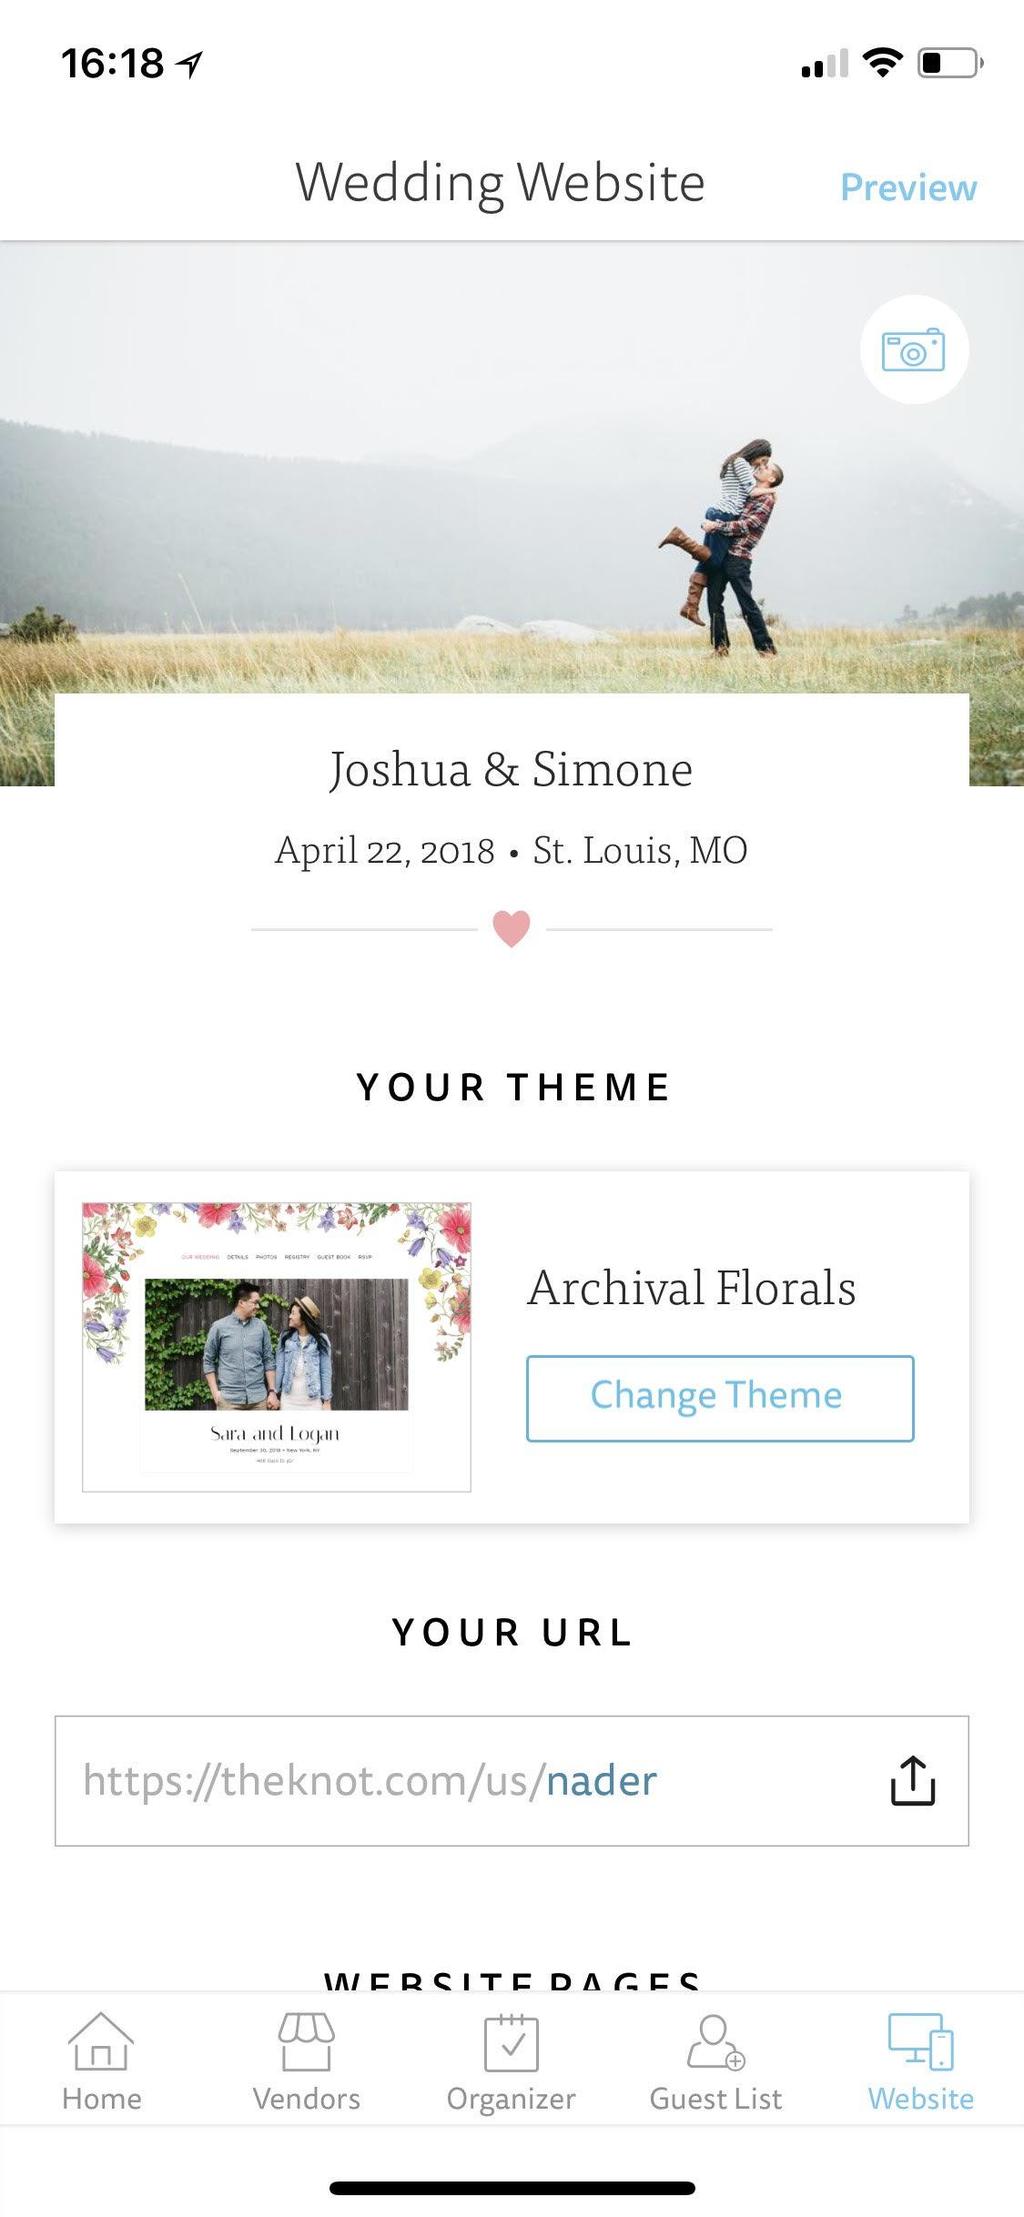 TRANSACTIONS INITIATIVES ~150M Gifts Strengthening Our Wedding Website Products Providing couples tools to make it easier for them to connect with their guests Continuing to Enhance Our Registry and